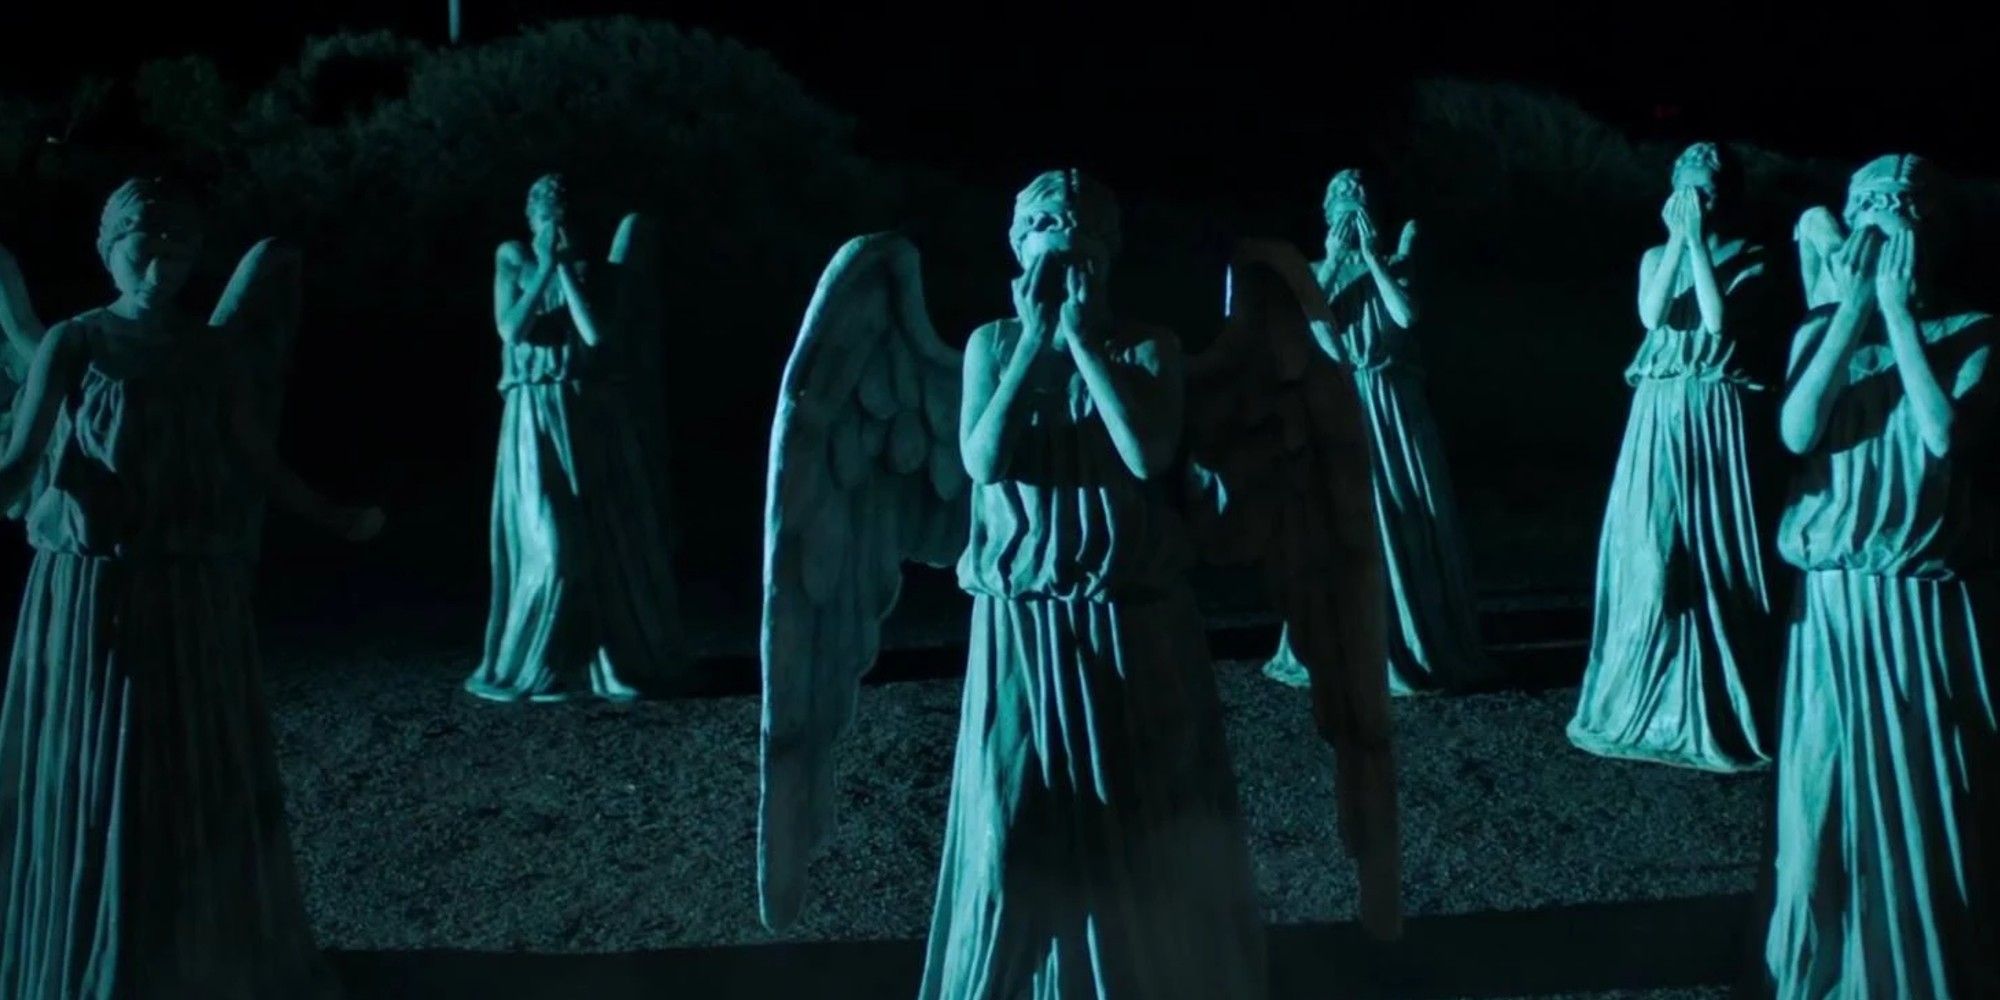 Village of the Angels Weeping in Doctor Who